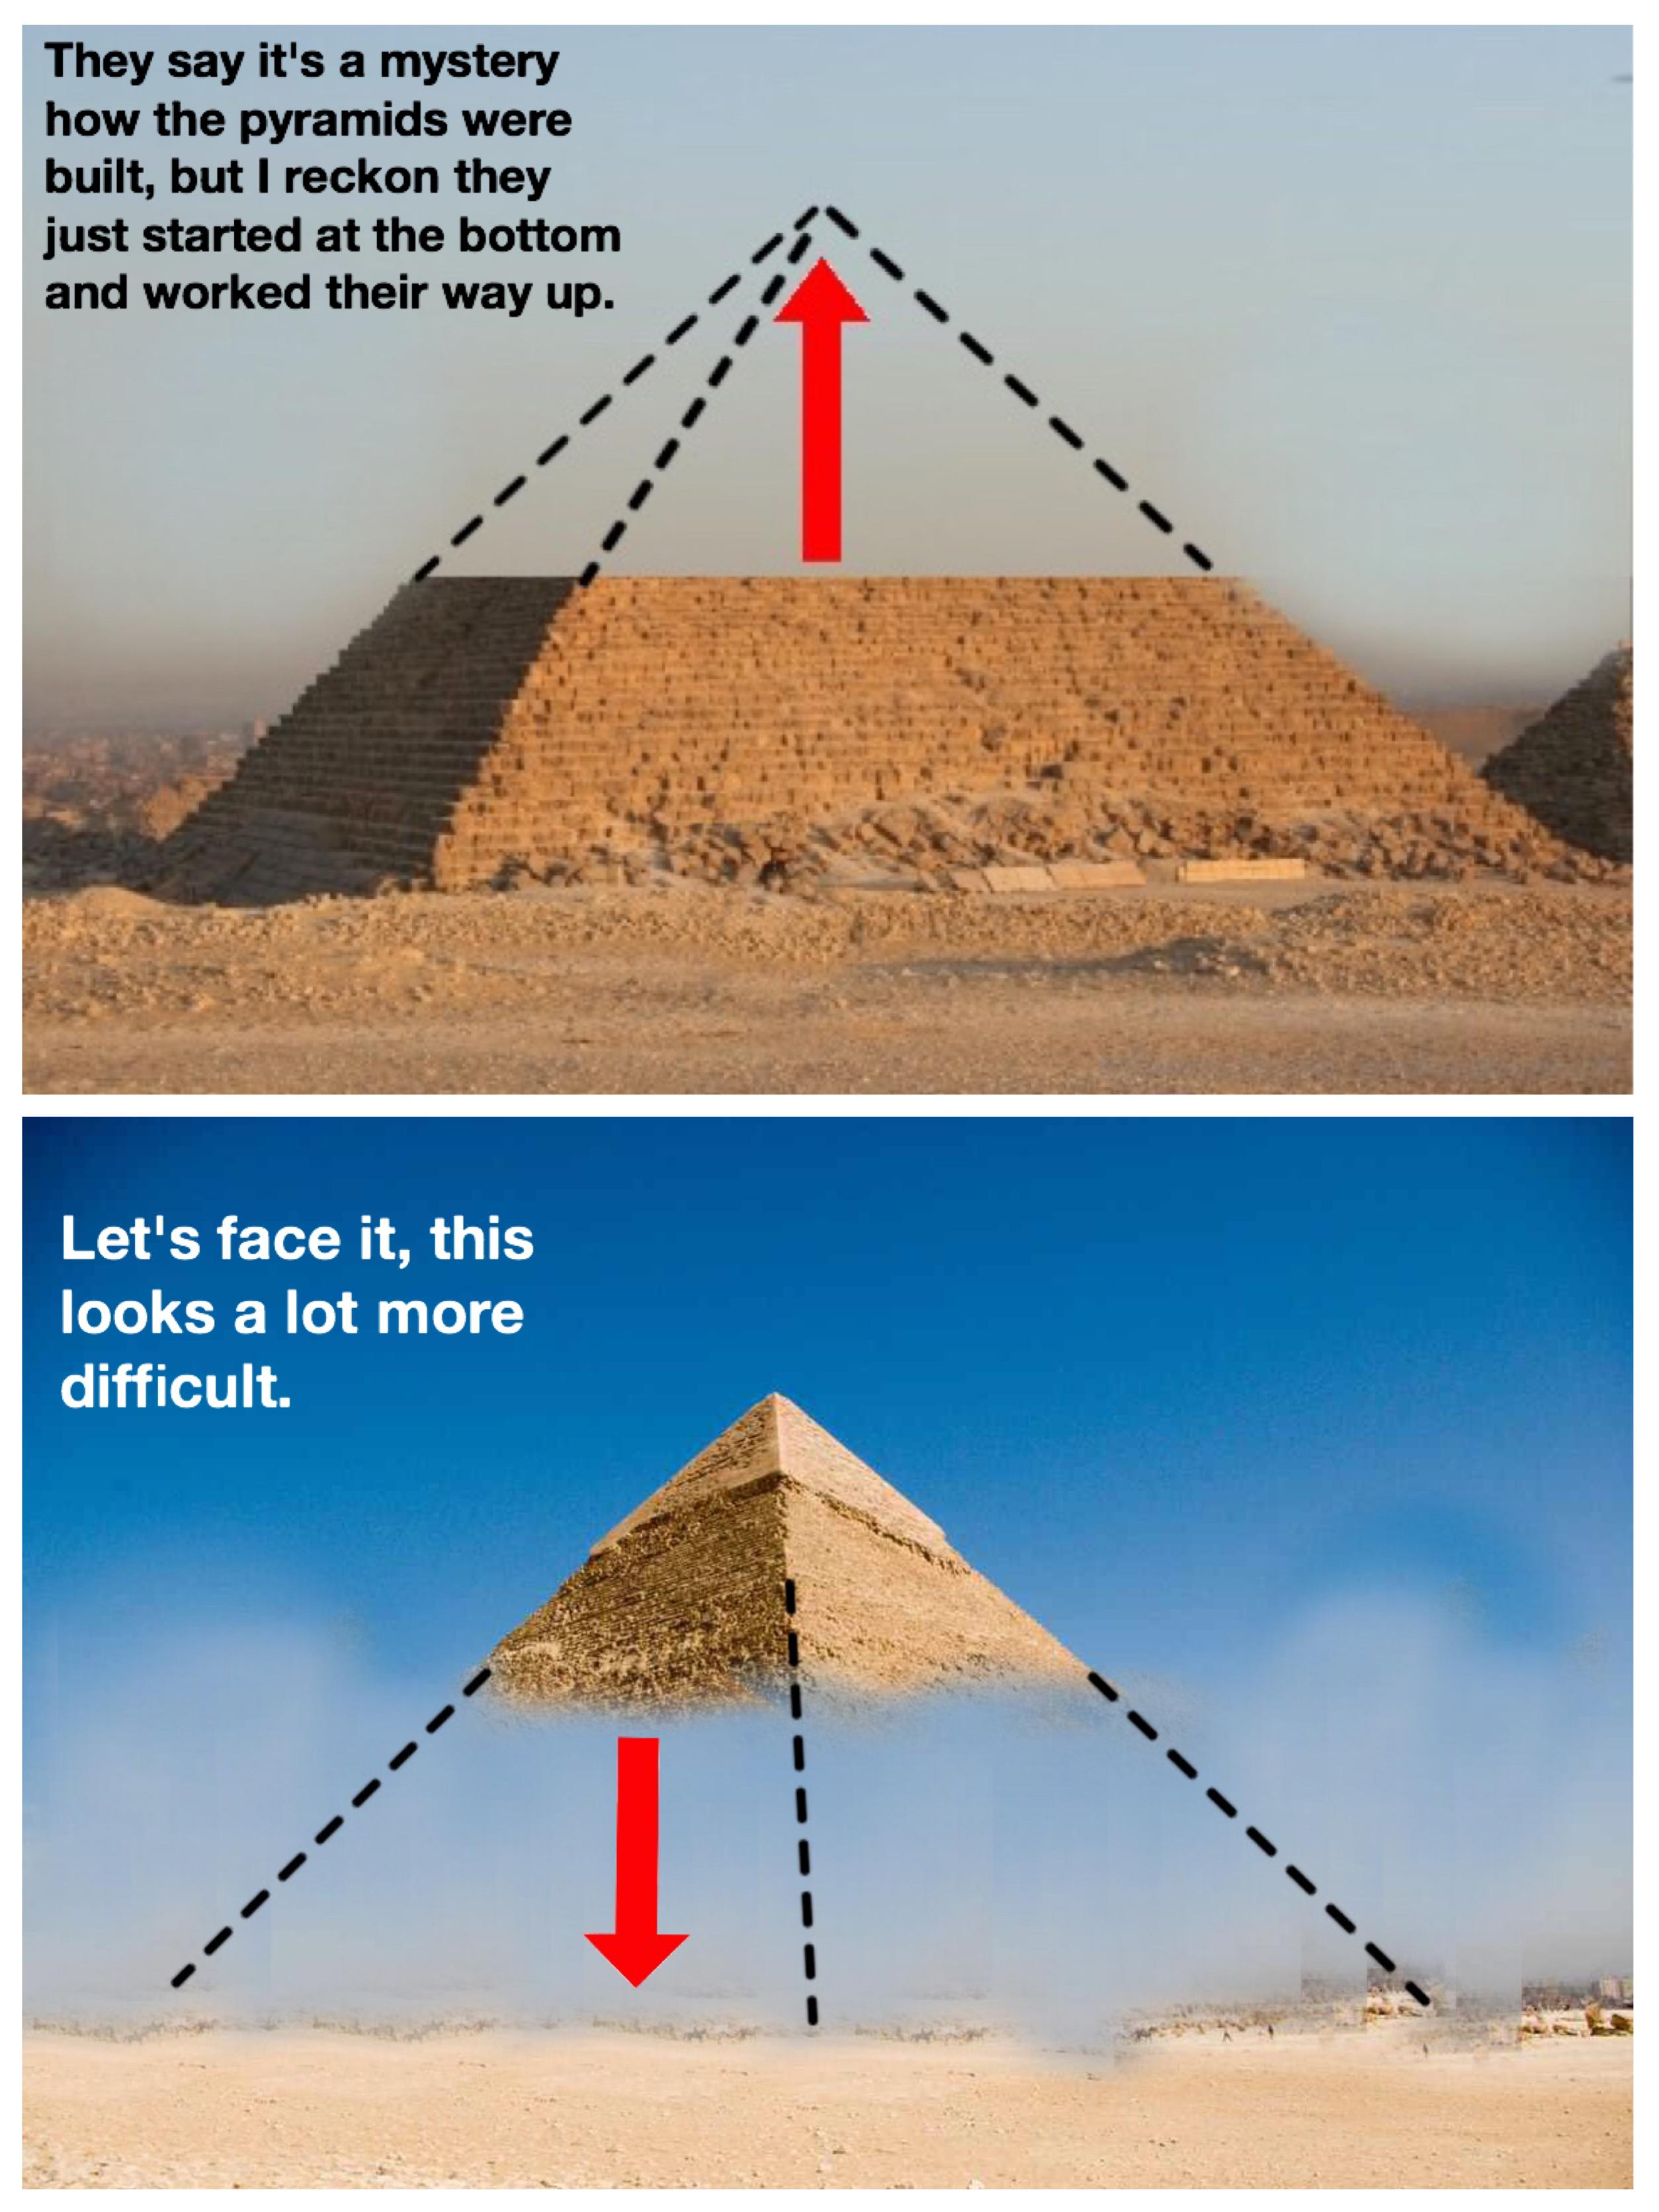 were the pyramids built reddit - They say it's a mystery how the pyramids were built, but I reckon they just started at the bottom and worked their way up. Let's face it, this looks a lot more difficult.